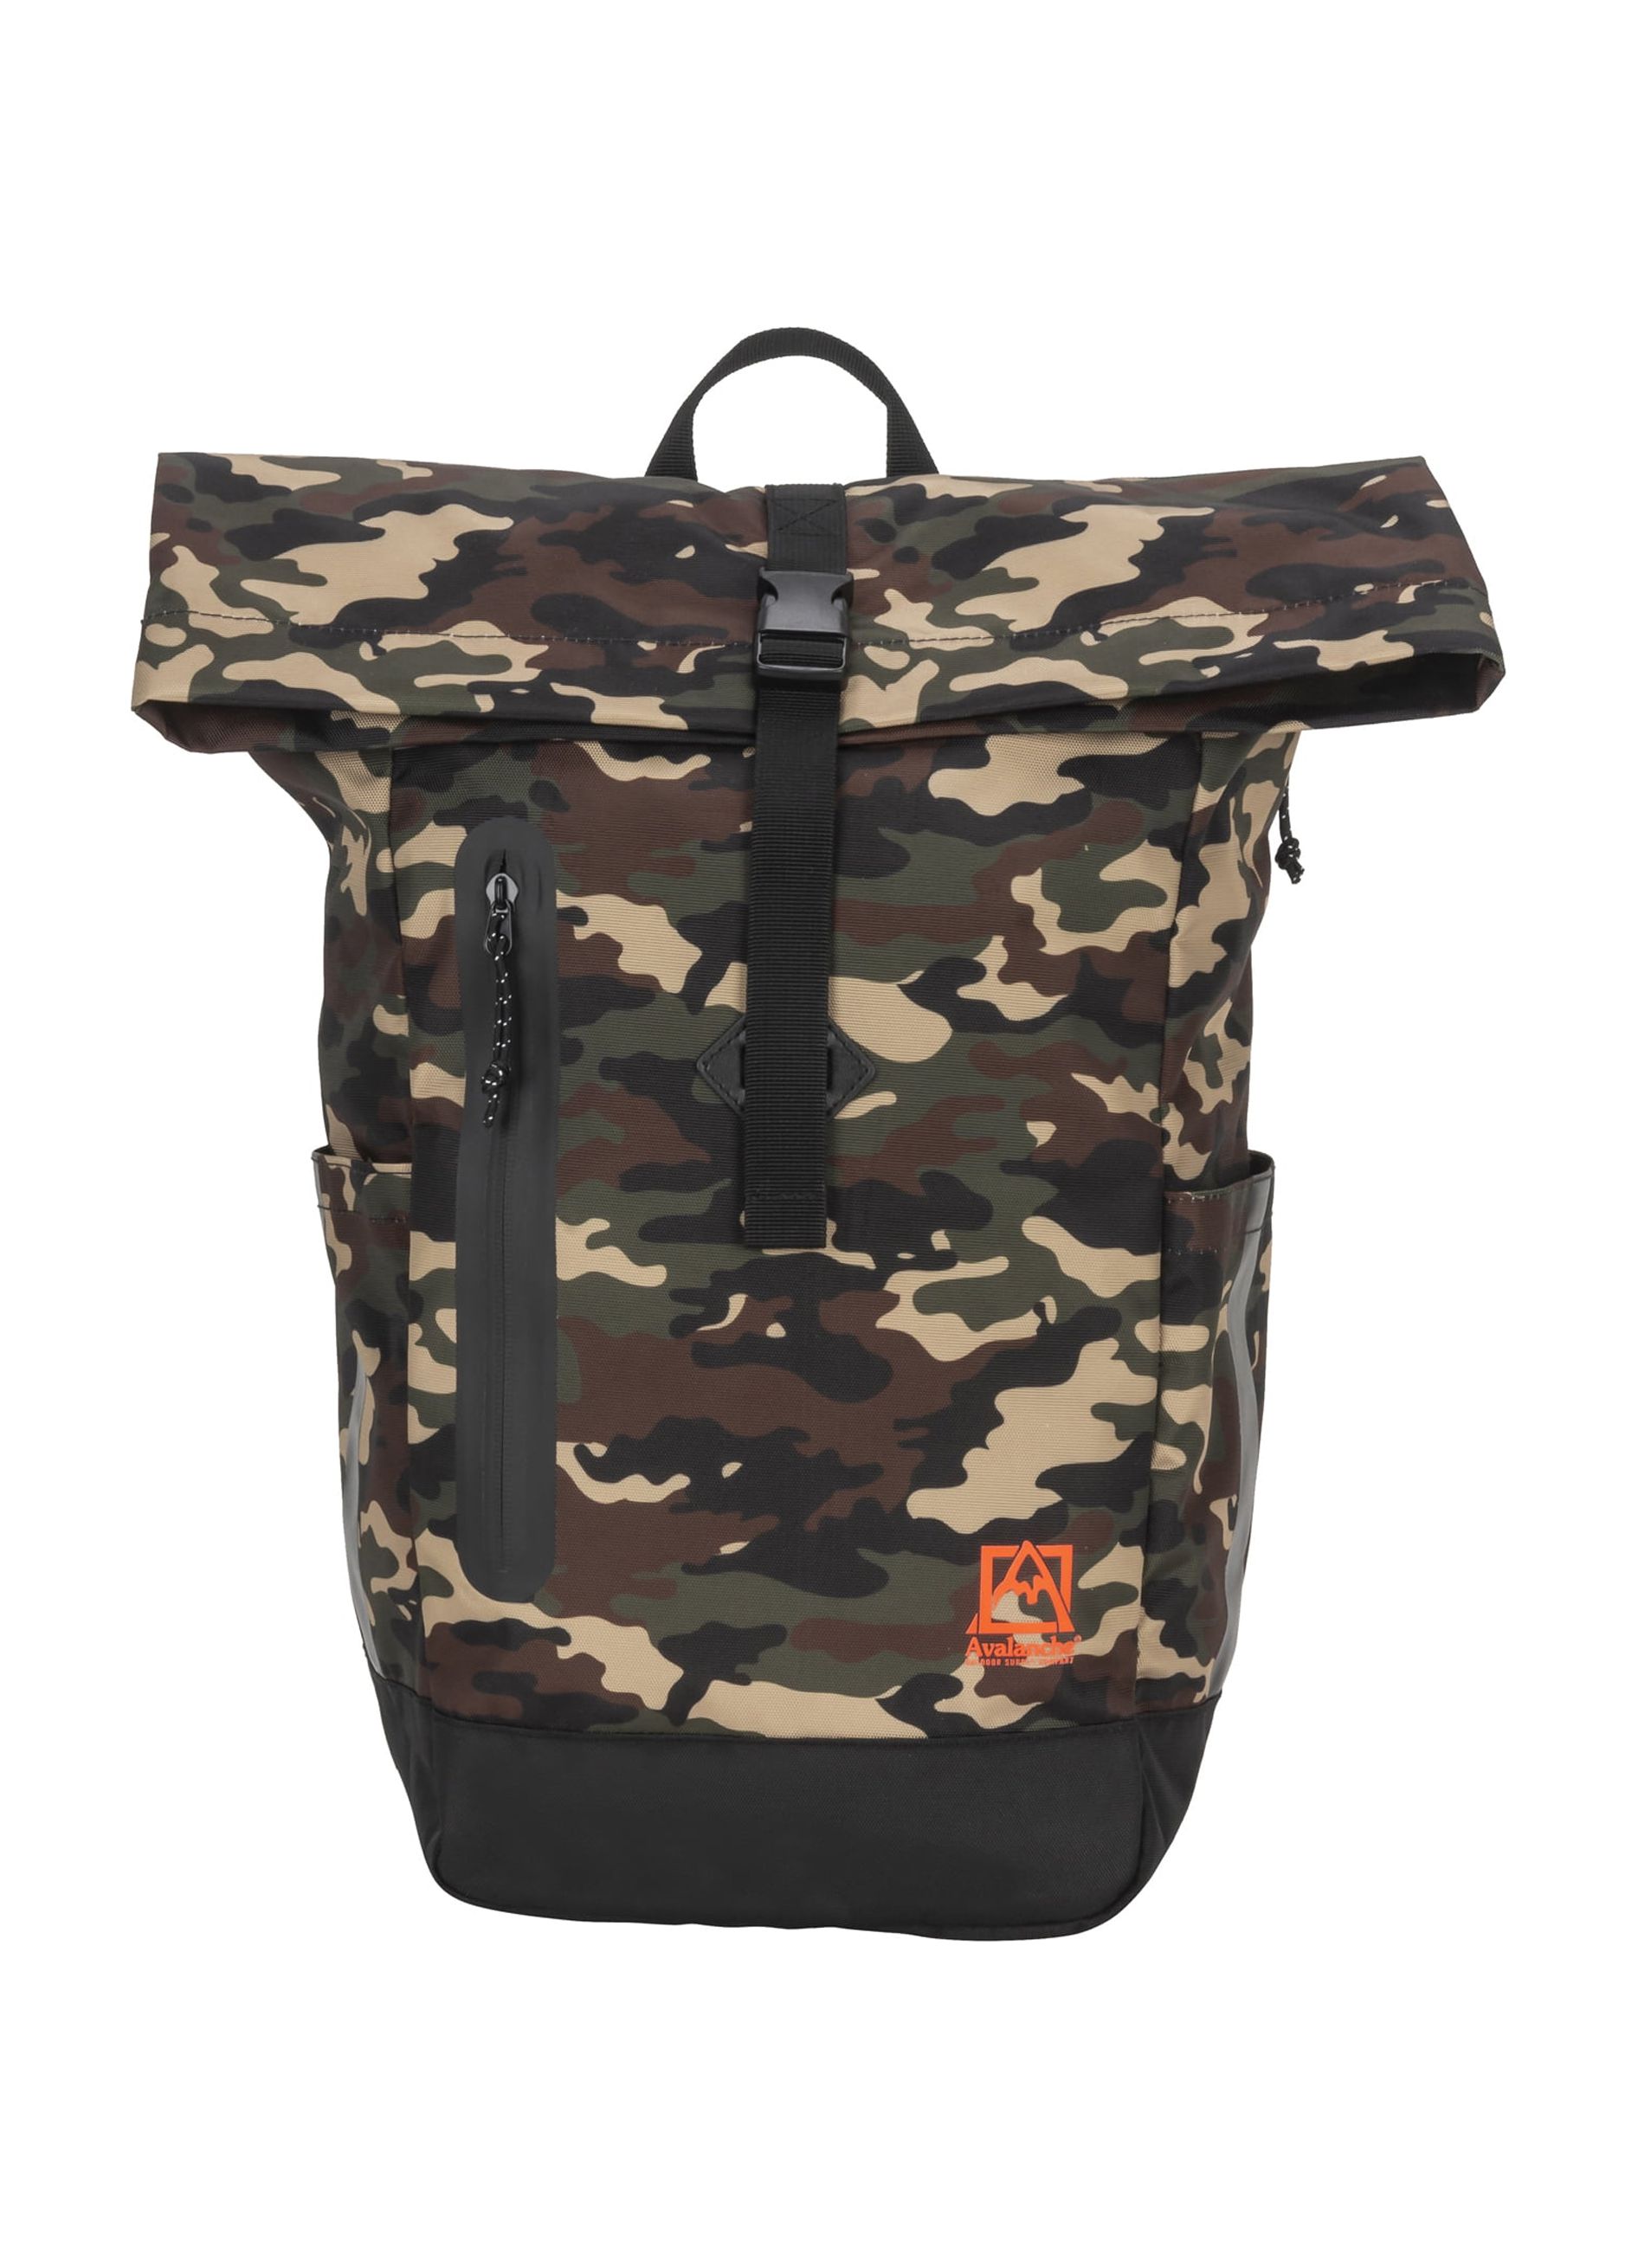 Avalanche Outdoors Eco Friendly Recycled 900D Polyester 20L Roll Top Backpack - image 4 of 4